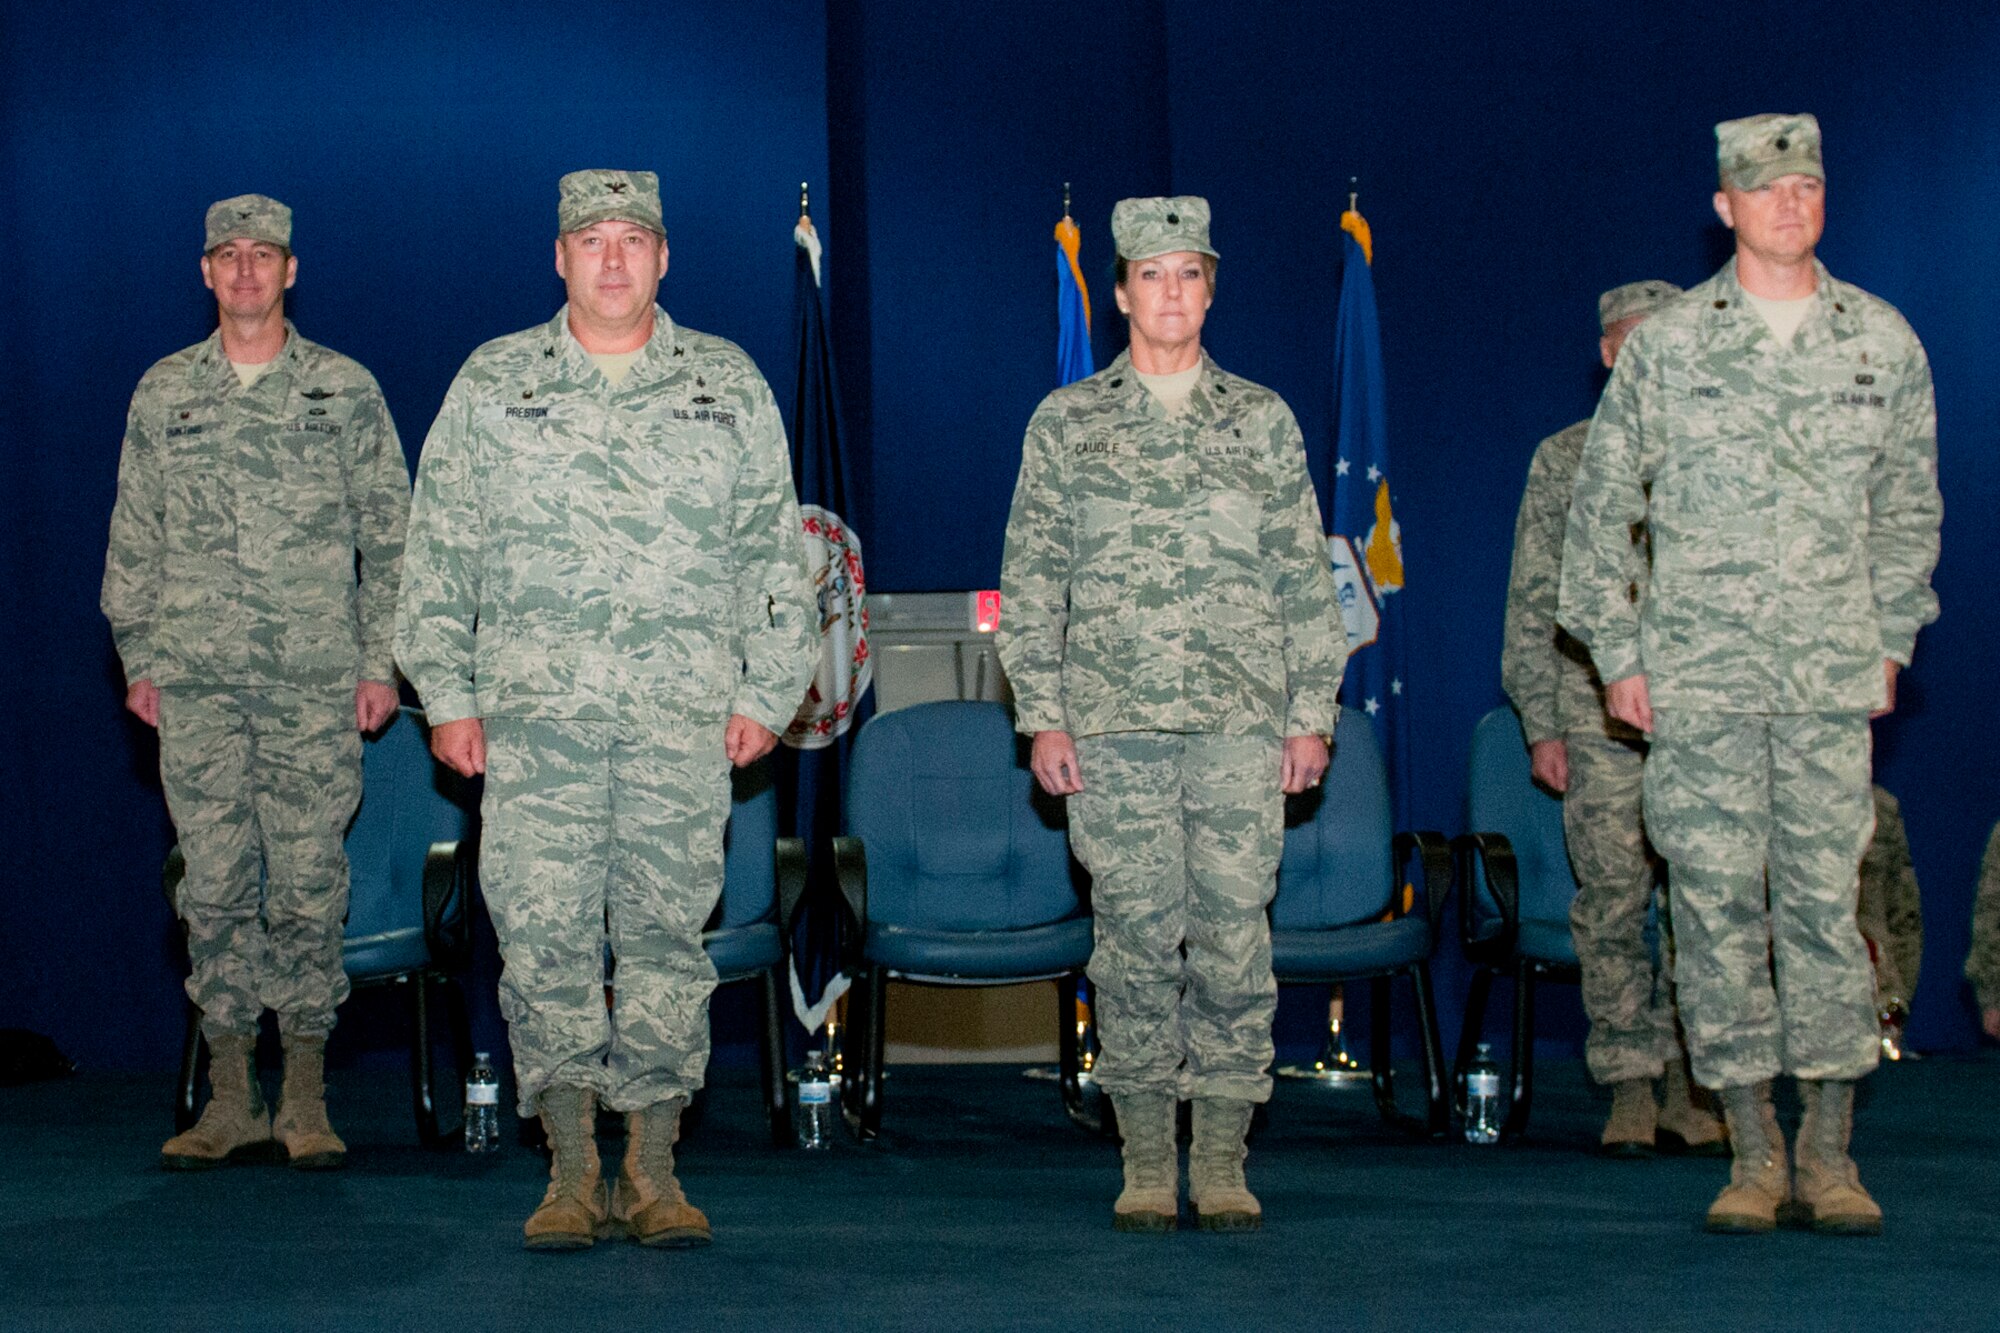 The 192nd Fighter Wing held a joint change of command ceremony for the 192nd Medical Group and Detachment 1 Chemical, Biological, Radiological, Nuclear and High-Yield Explosive Enhanced Response Force Package (CERFP), Medical Group, March 20, 2016, at Joint Base Langley-Eustis, Virginia. (U.S. Air National Guard photo by Technical Sgt. Jonathan P. Garcia)